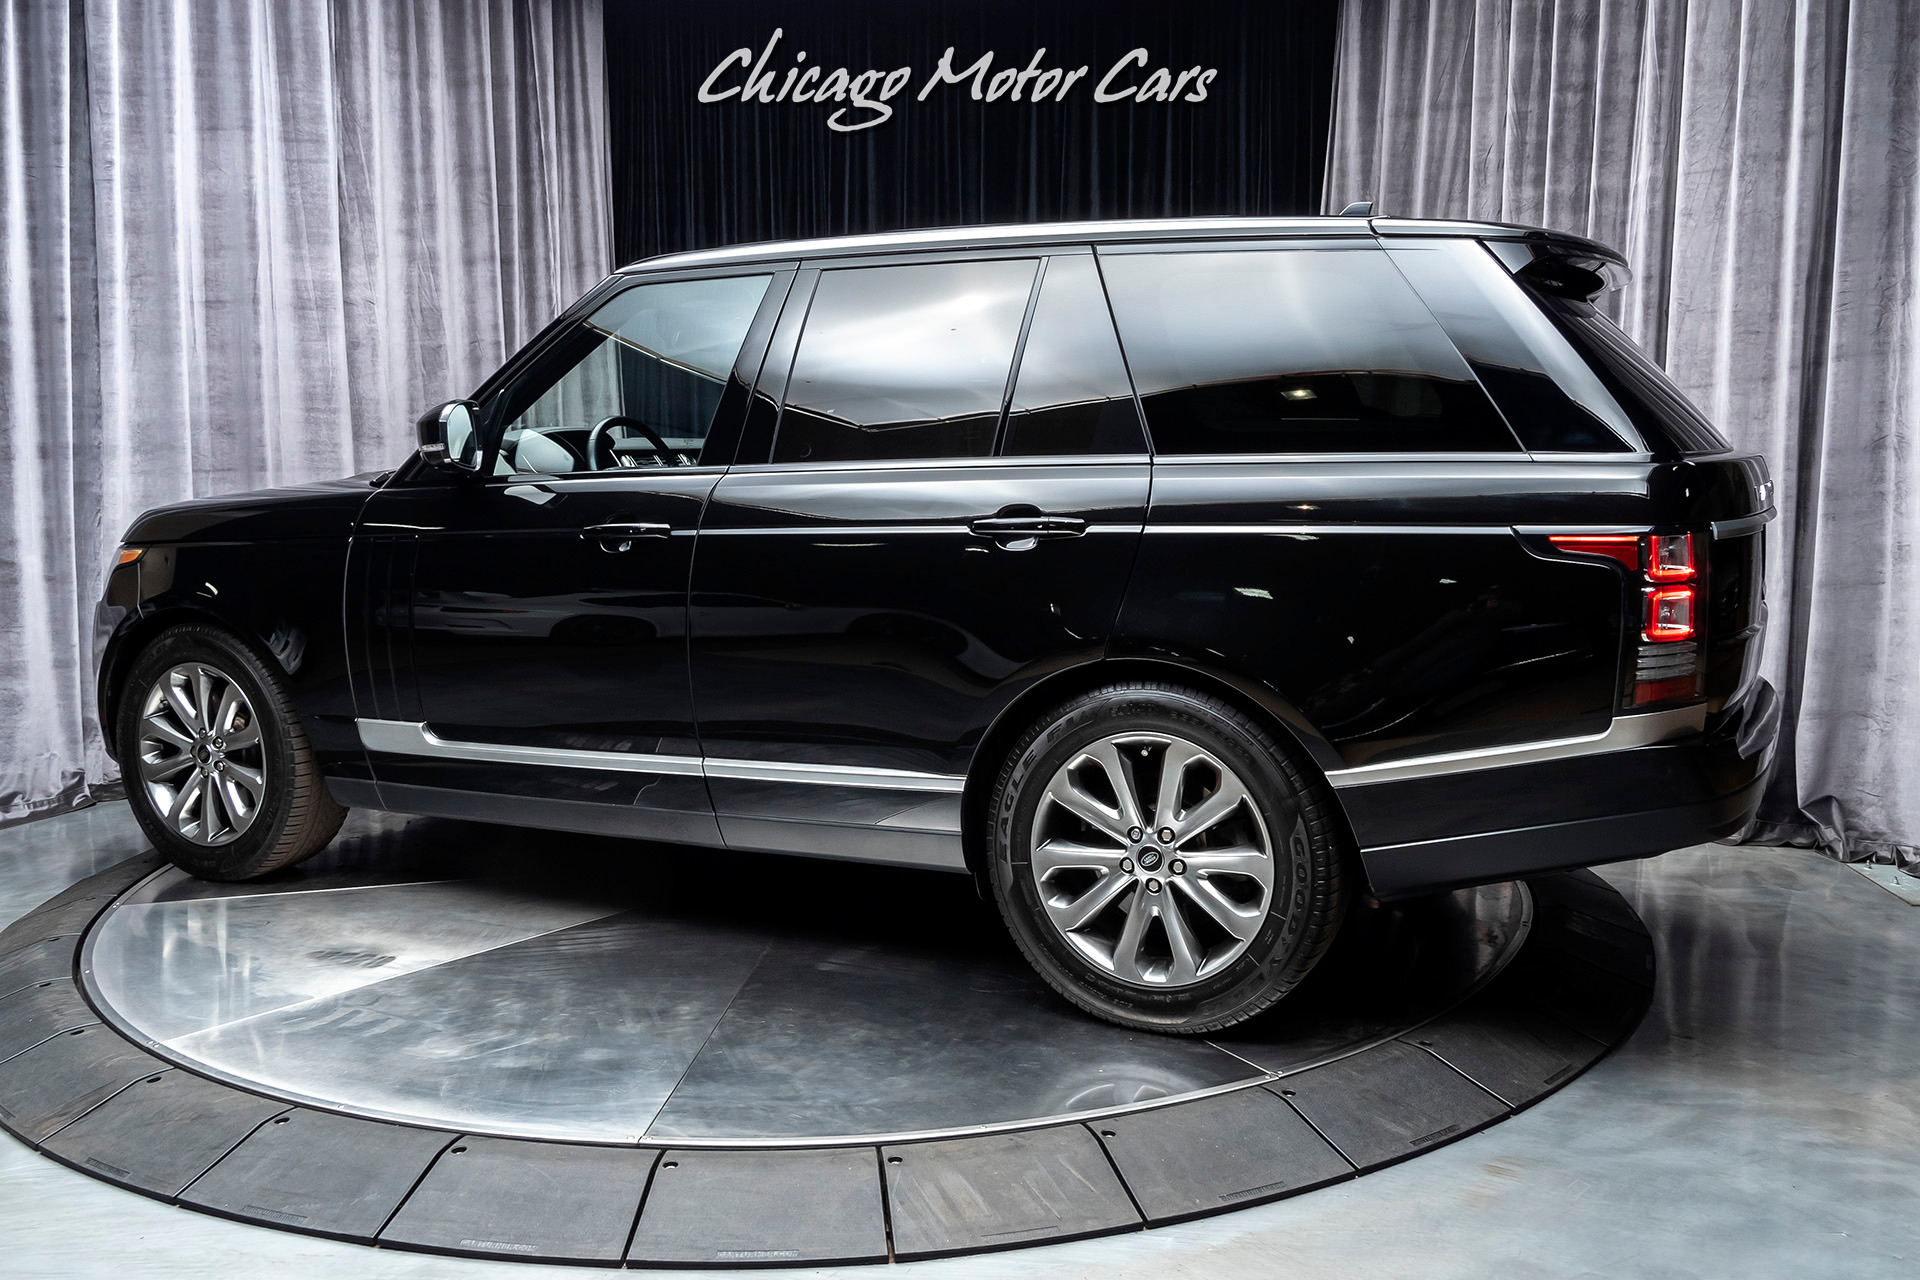 Used-2016-Land-Rover-Range-Rover-30L-Supercharged-SUV-ORIGINAL-MSRP-95K-VISION-ASSIST-PACKAGE